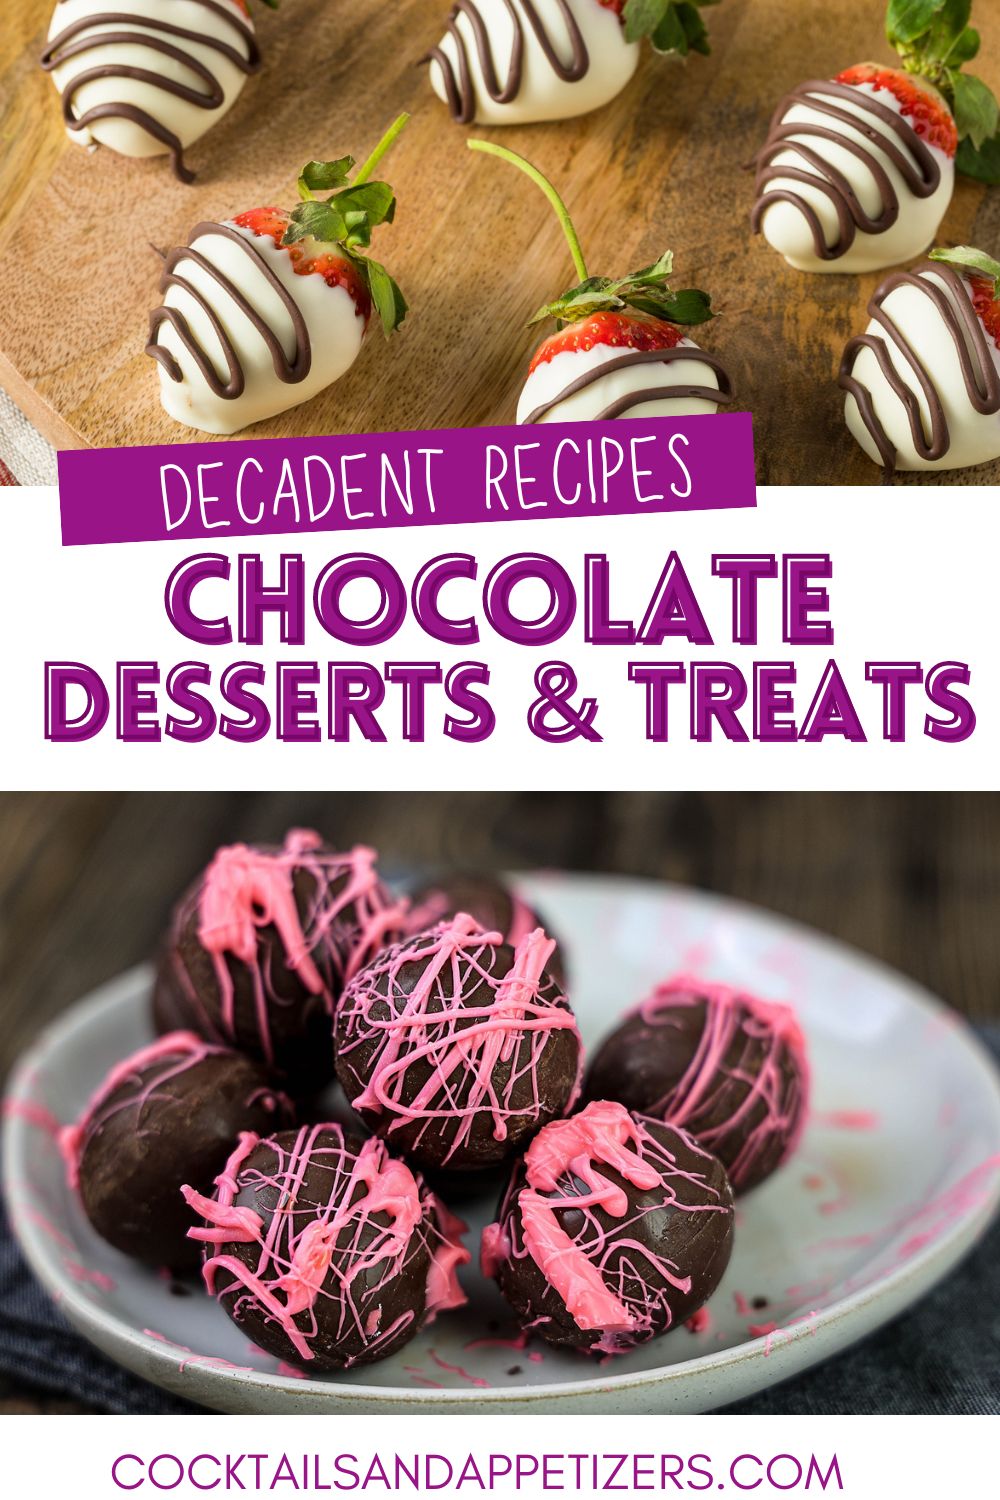 Chocolate recipes featuring chocolate dipped strawberries and amaretto filled chocolates in a dish